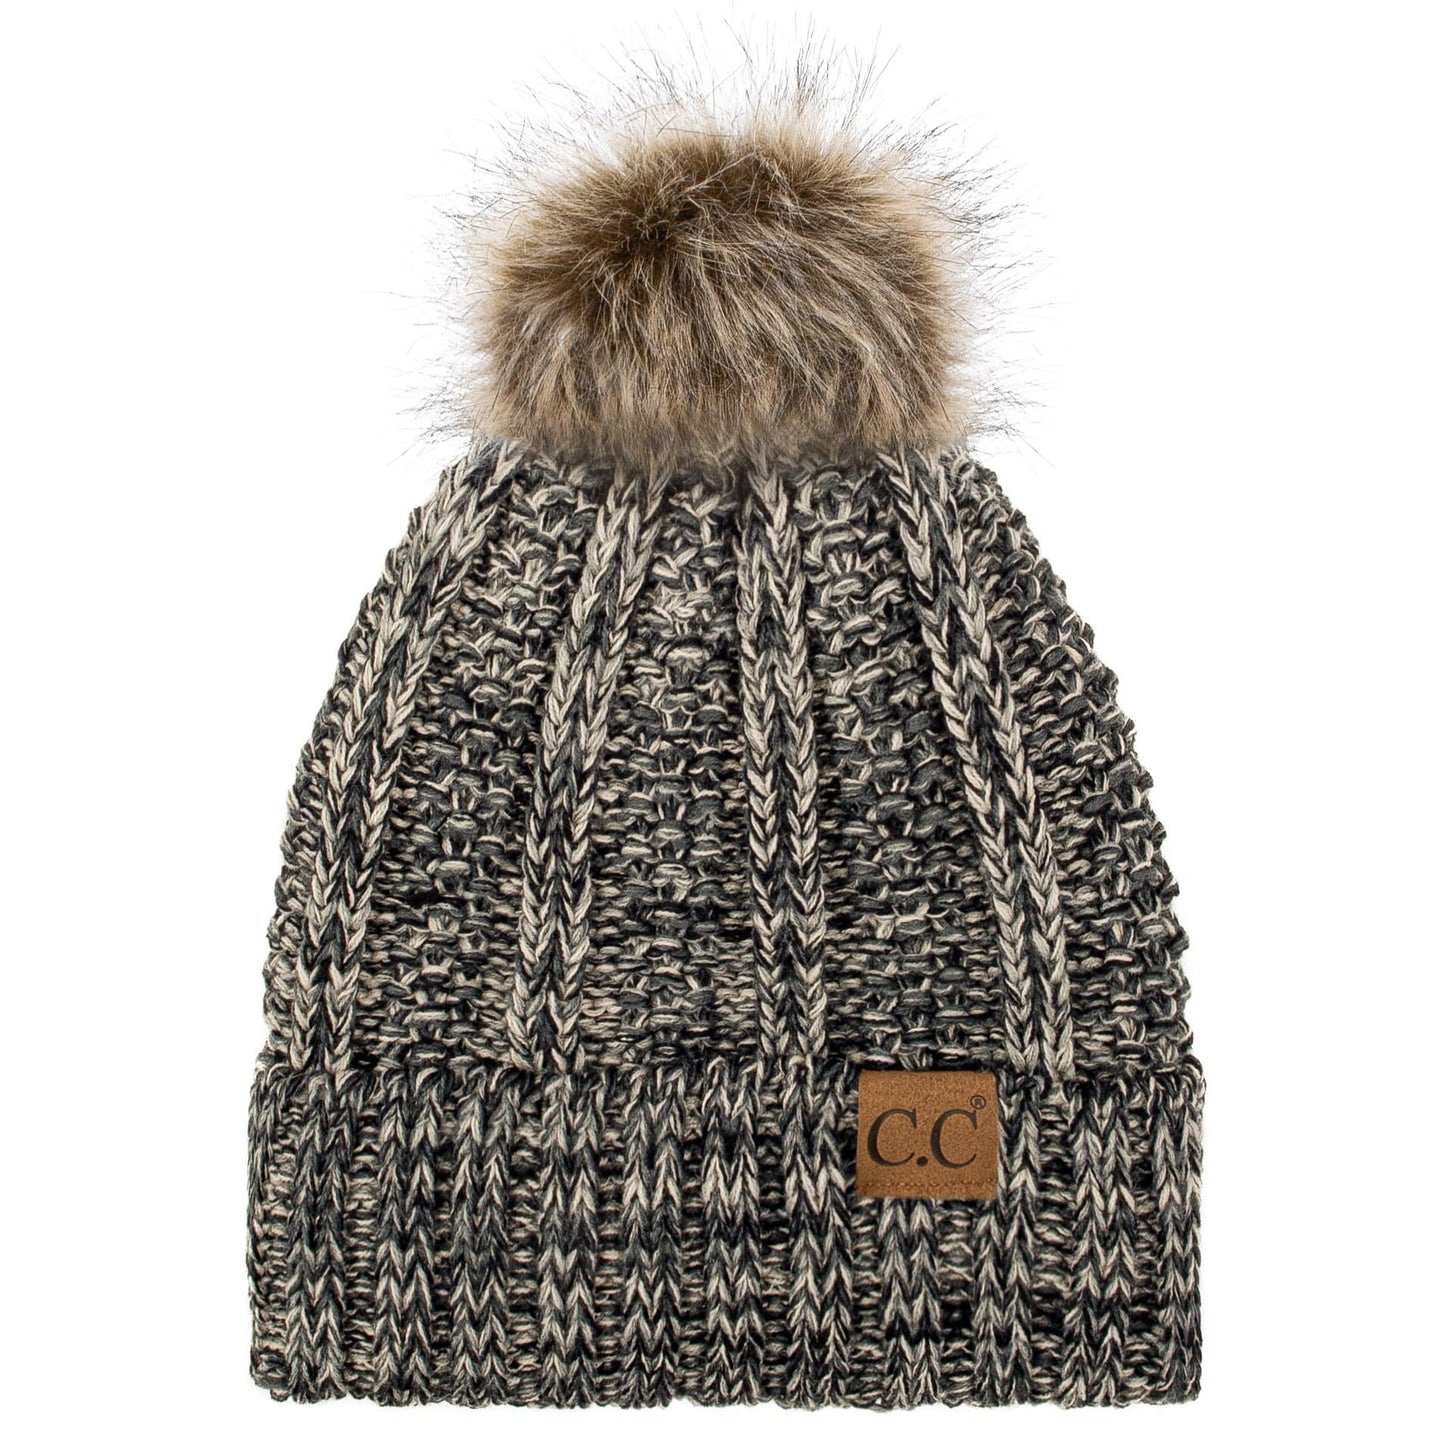 C.C Apparel C.C YJ820 - Thick Cable Knit Hat Faux Fur Pom Pom Fleece Lined Mixed Skull Cap Cuff Beanie